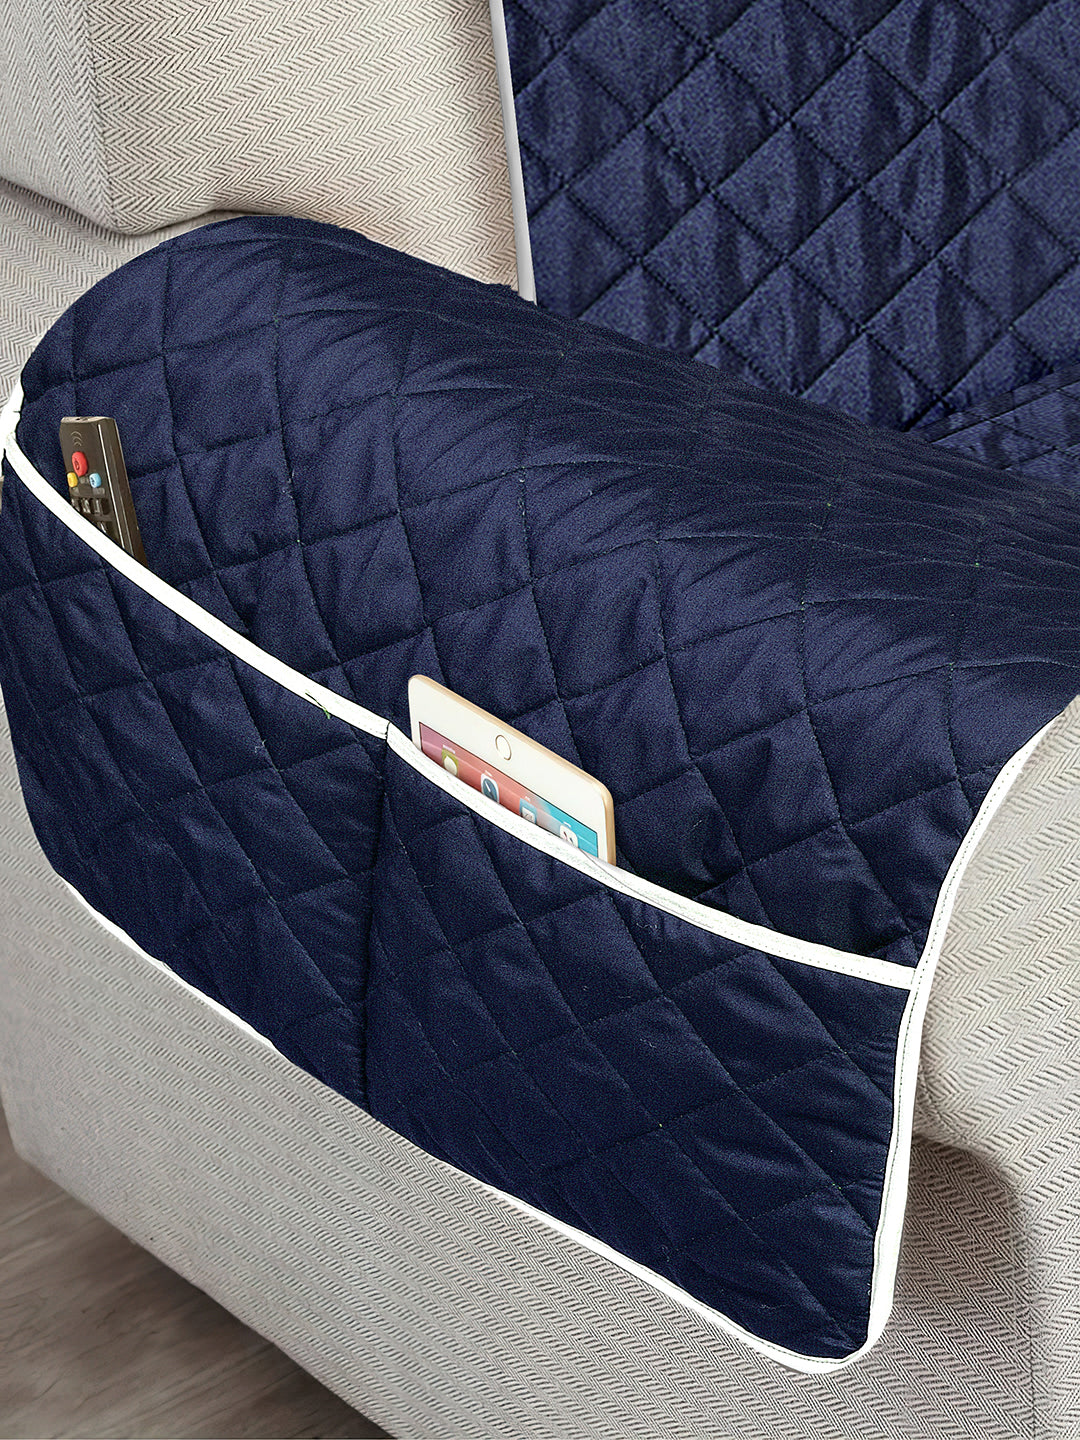 1 Seater Navy Blue